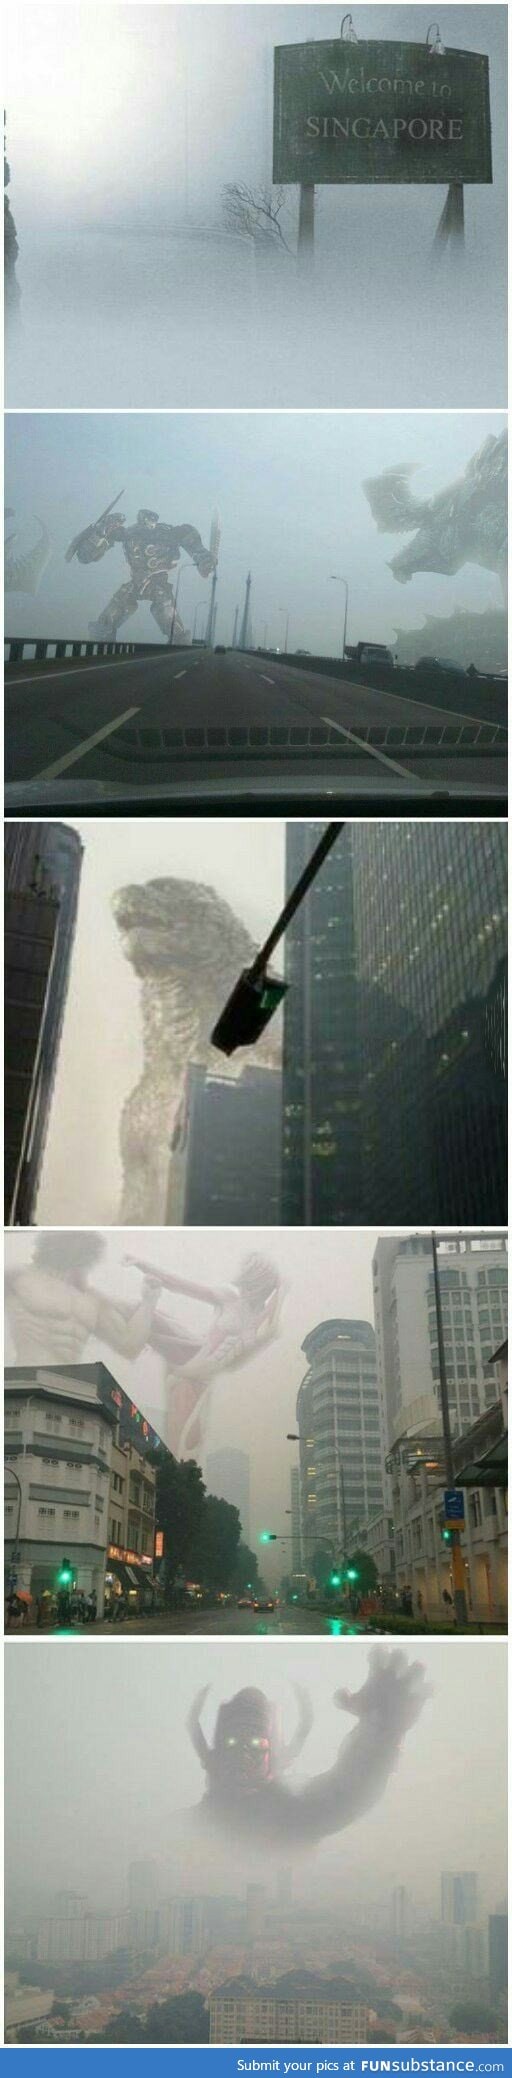 Photoshop experts in Singapore decided to take advantage of the haze situation there